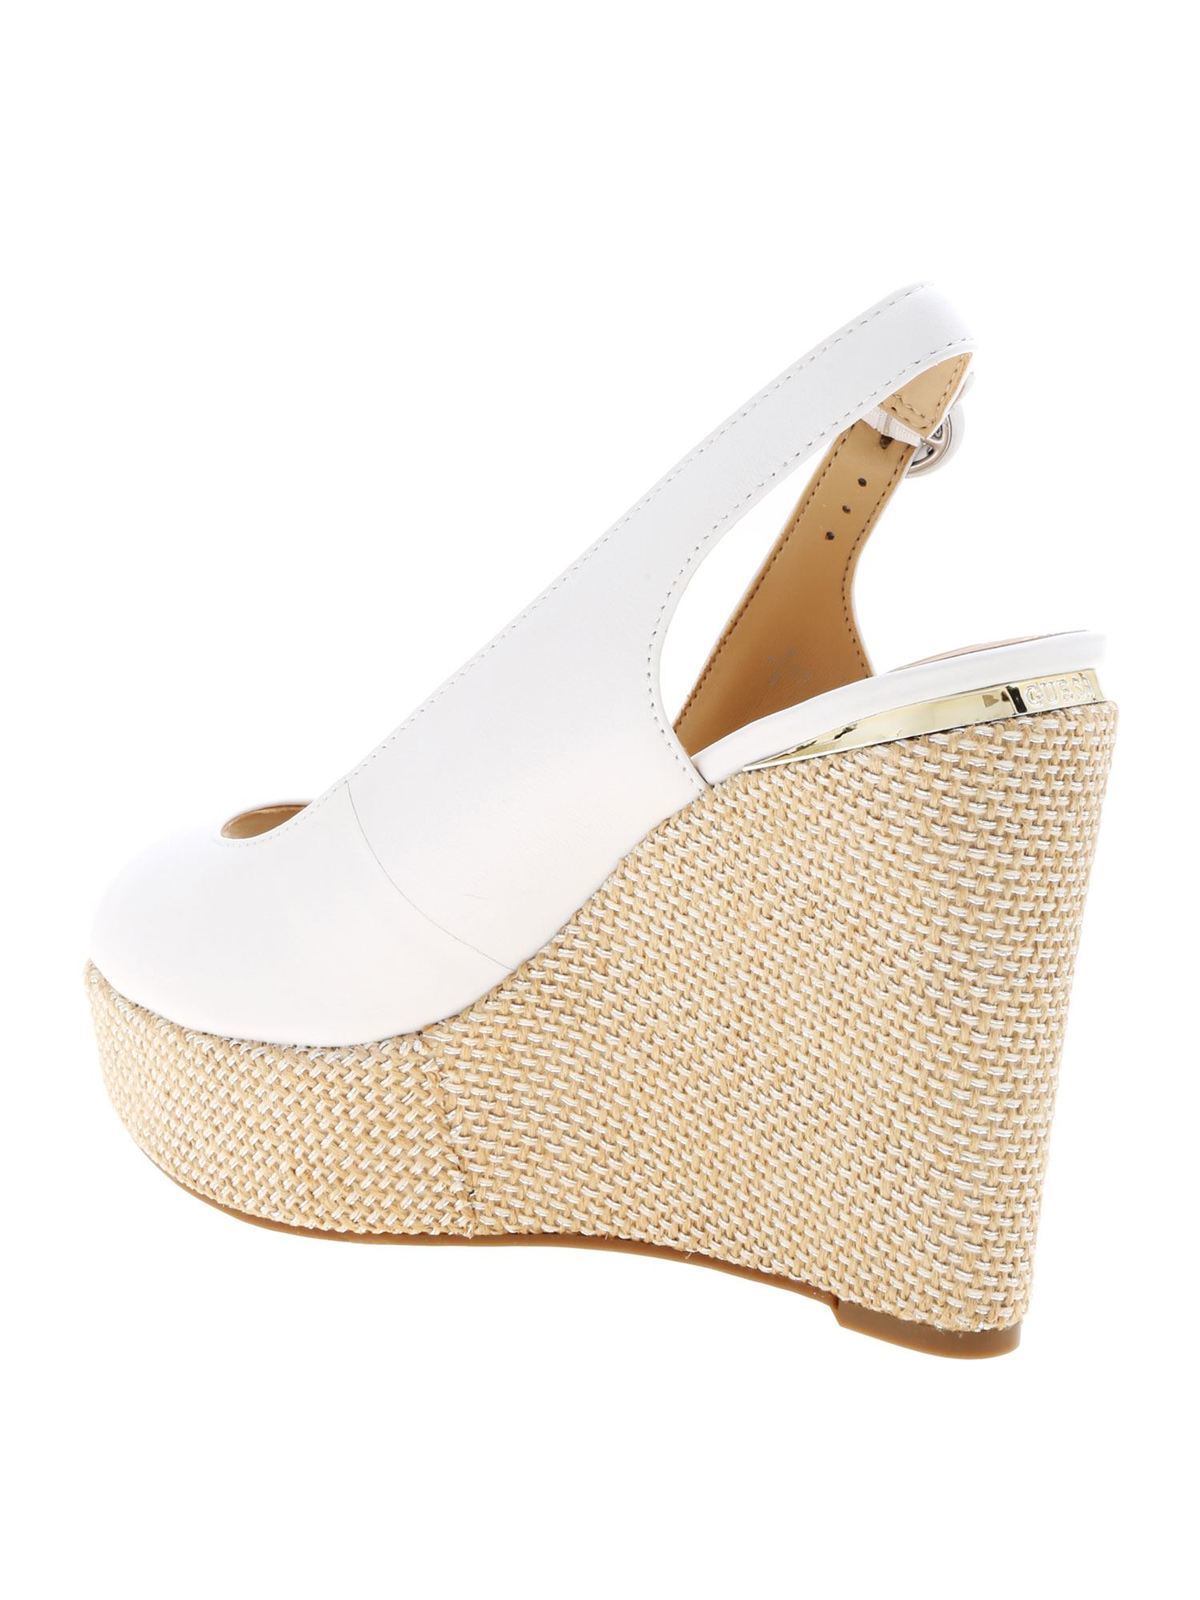 Guess - Hardy wedges in white leather - sandals - FL6HRDLEA04WHITE